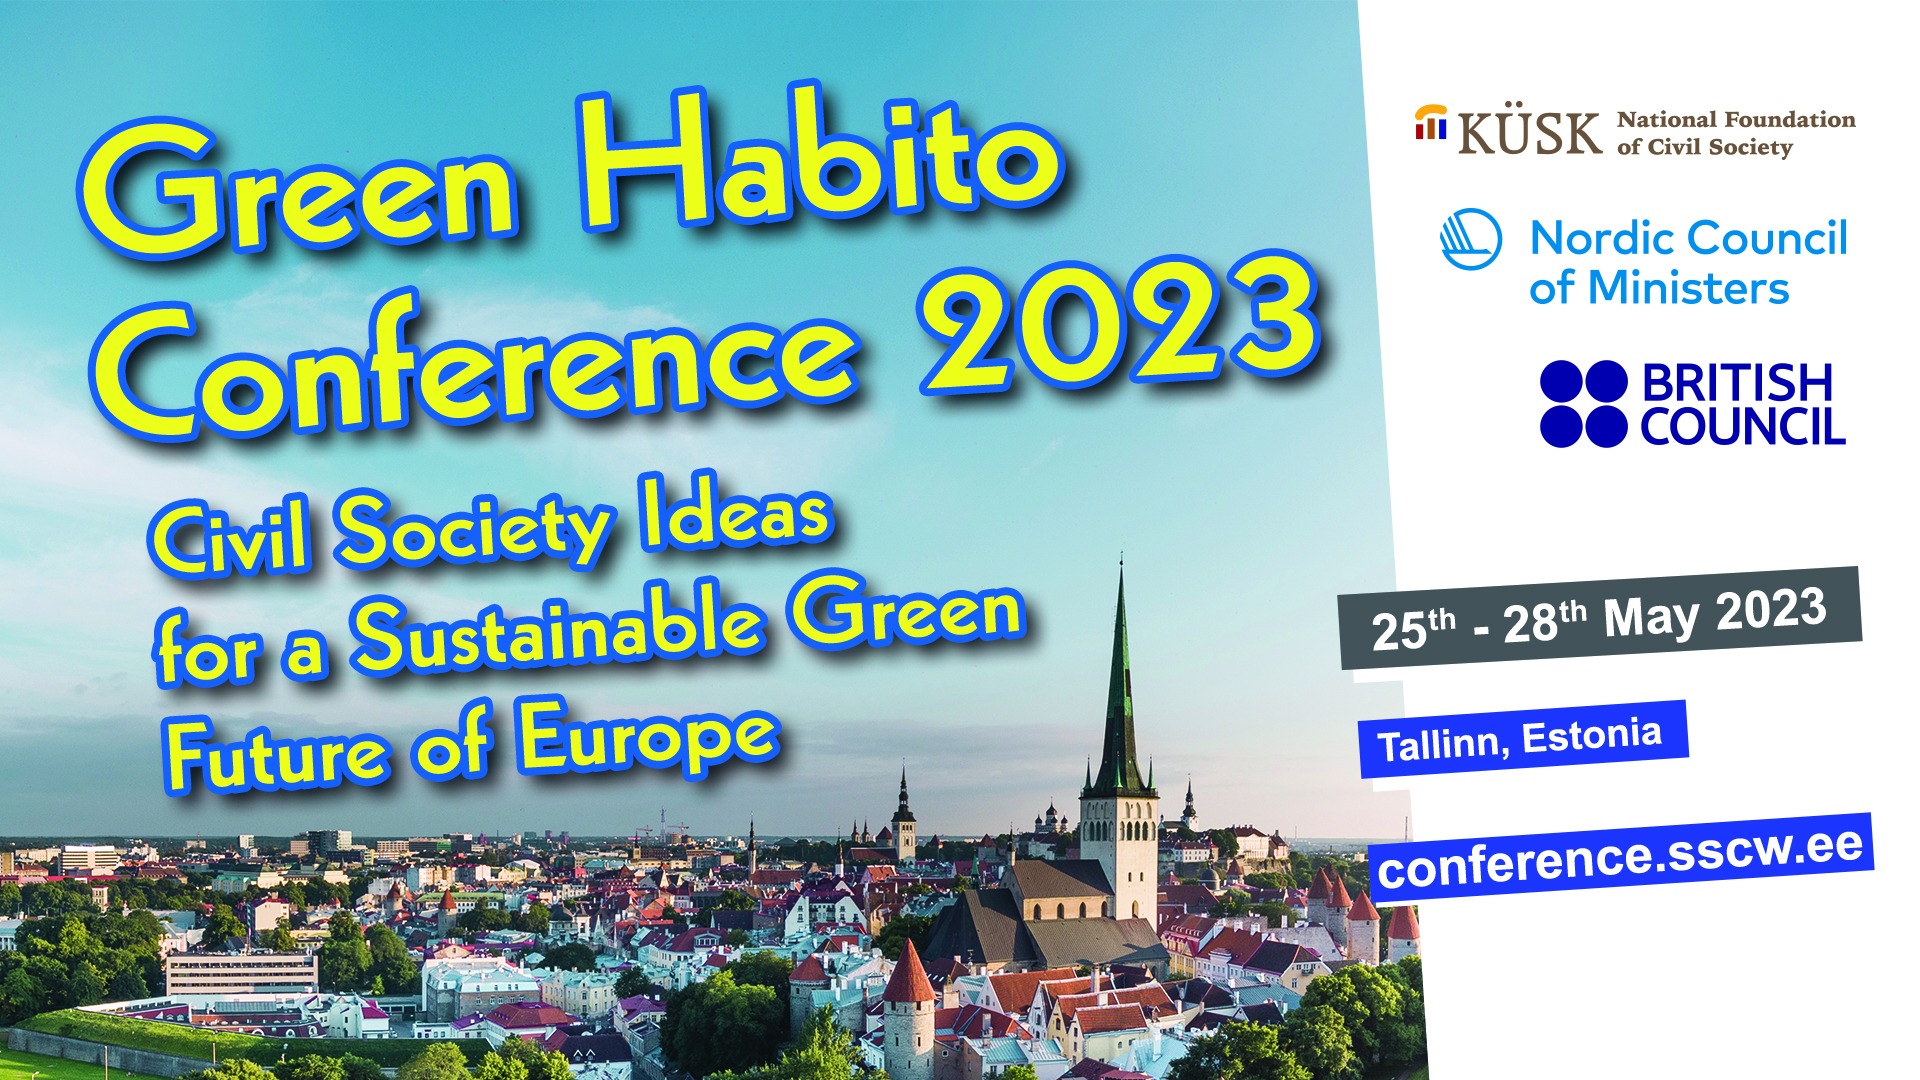 JOIN US AT GREEN HABITO CONFERENCE 2023 “CIVIL SOCIETY IDEAS FOR A SUSTAINABLE GREEN FUTURE OF EUROPE” 25-28TH MAY 2023 IN TALLINN